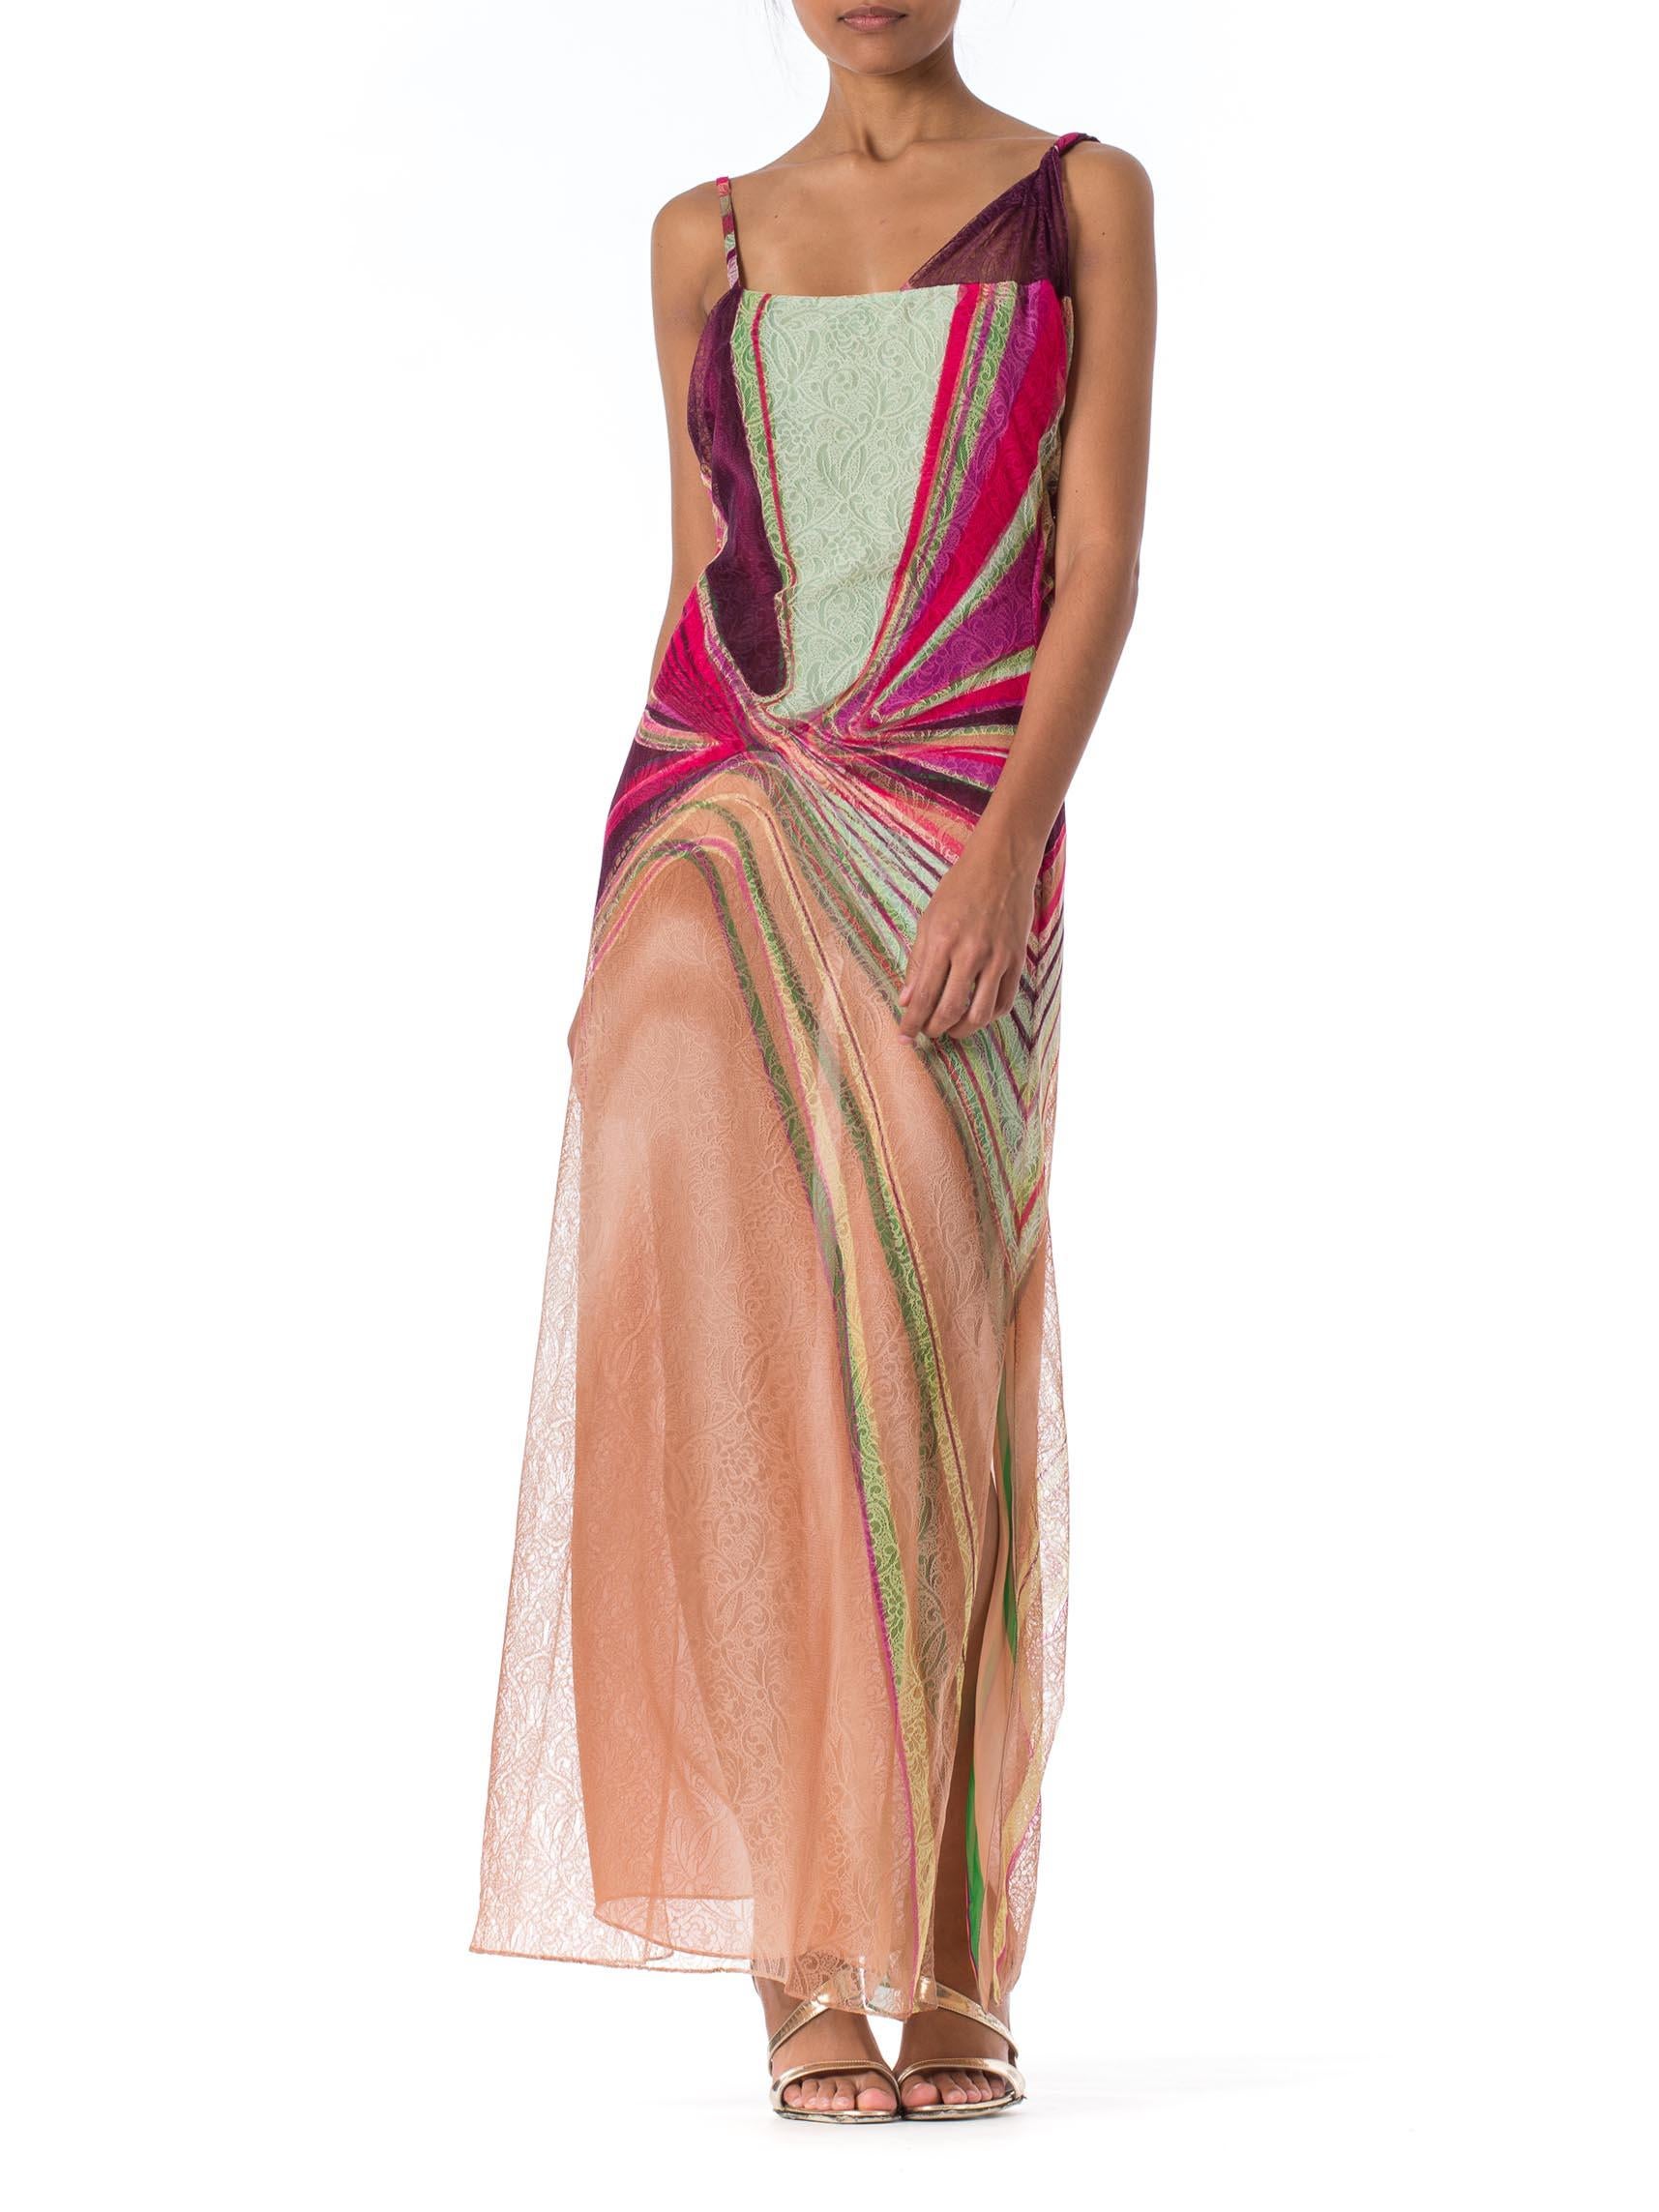 Gianni Versace Couture Runway Editorial Backless Sheer Chiffon and Lace Gown 5